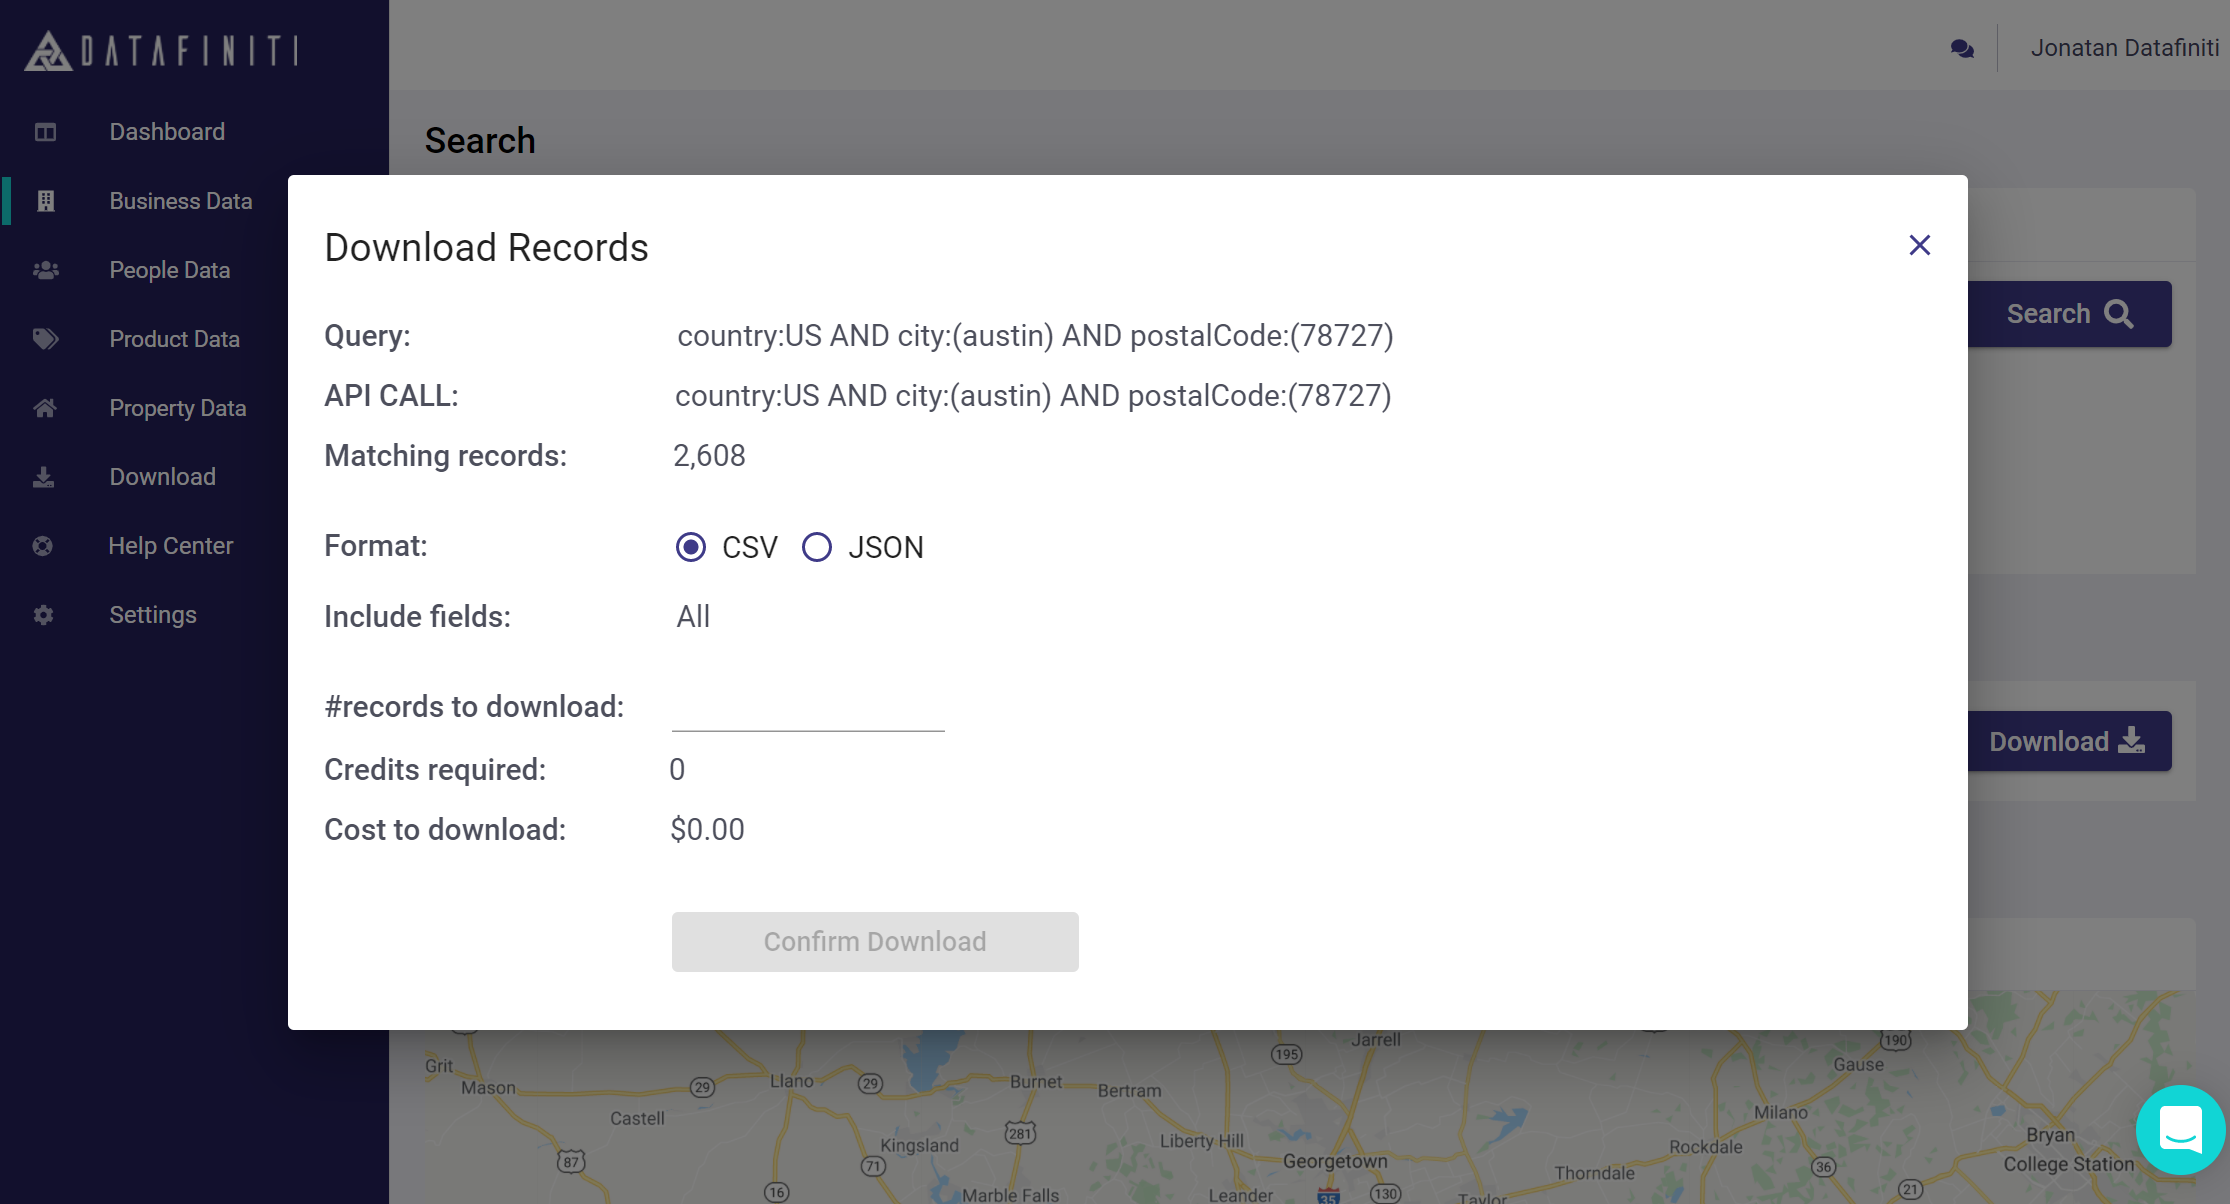 The "Download" button will prompt you with the "Download Records" where you can a) determine if you want JSON or CSV format, b) set the number of records to download, and c) determine which specific view you'd like to use.